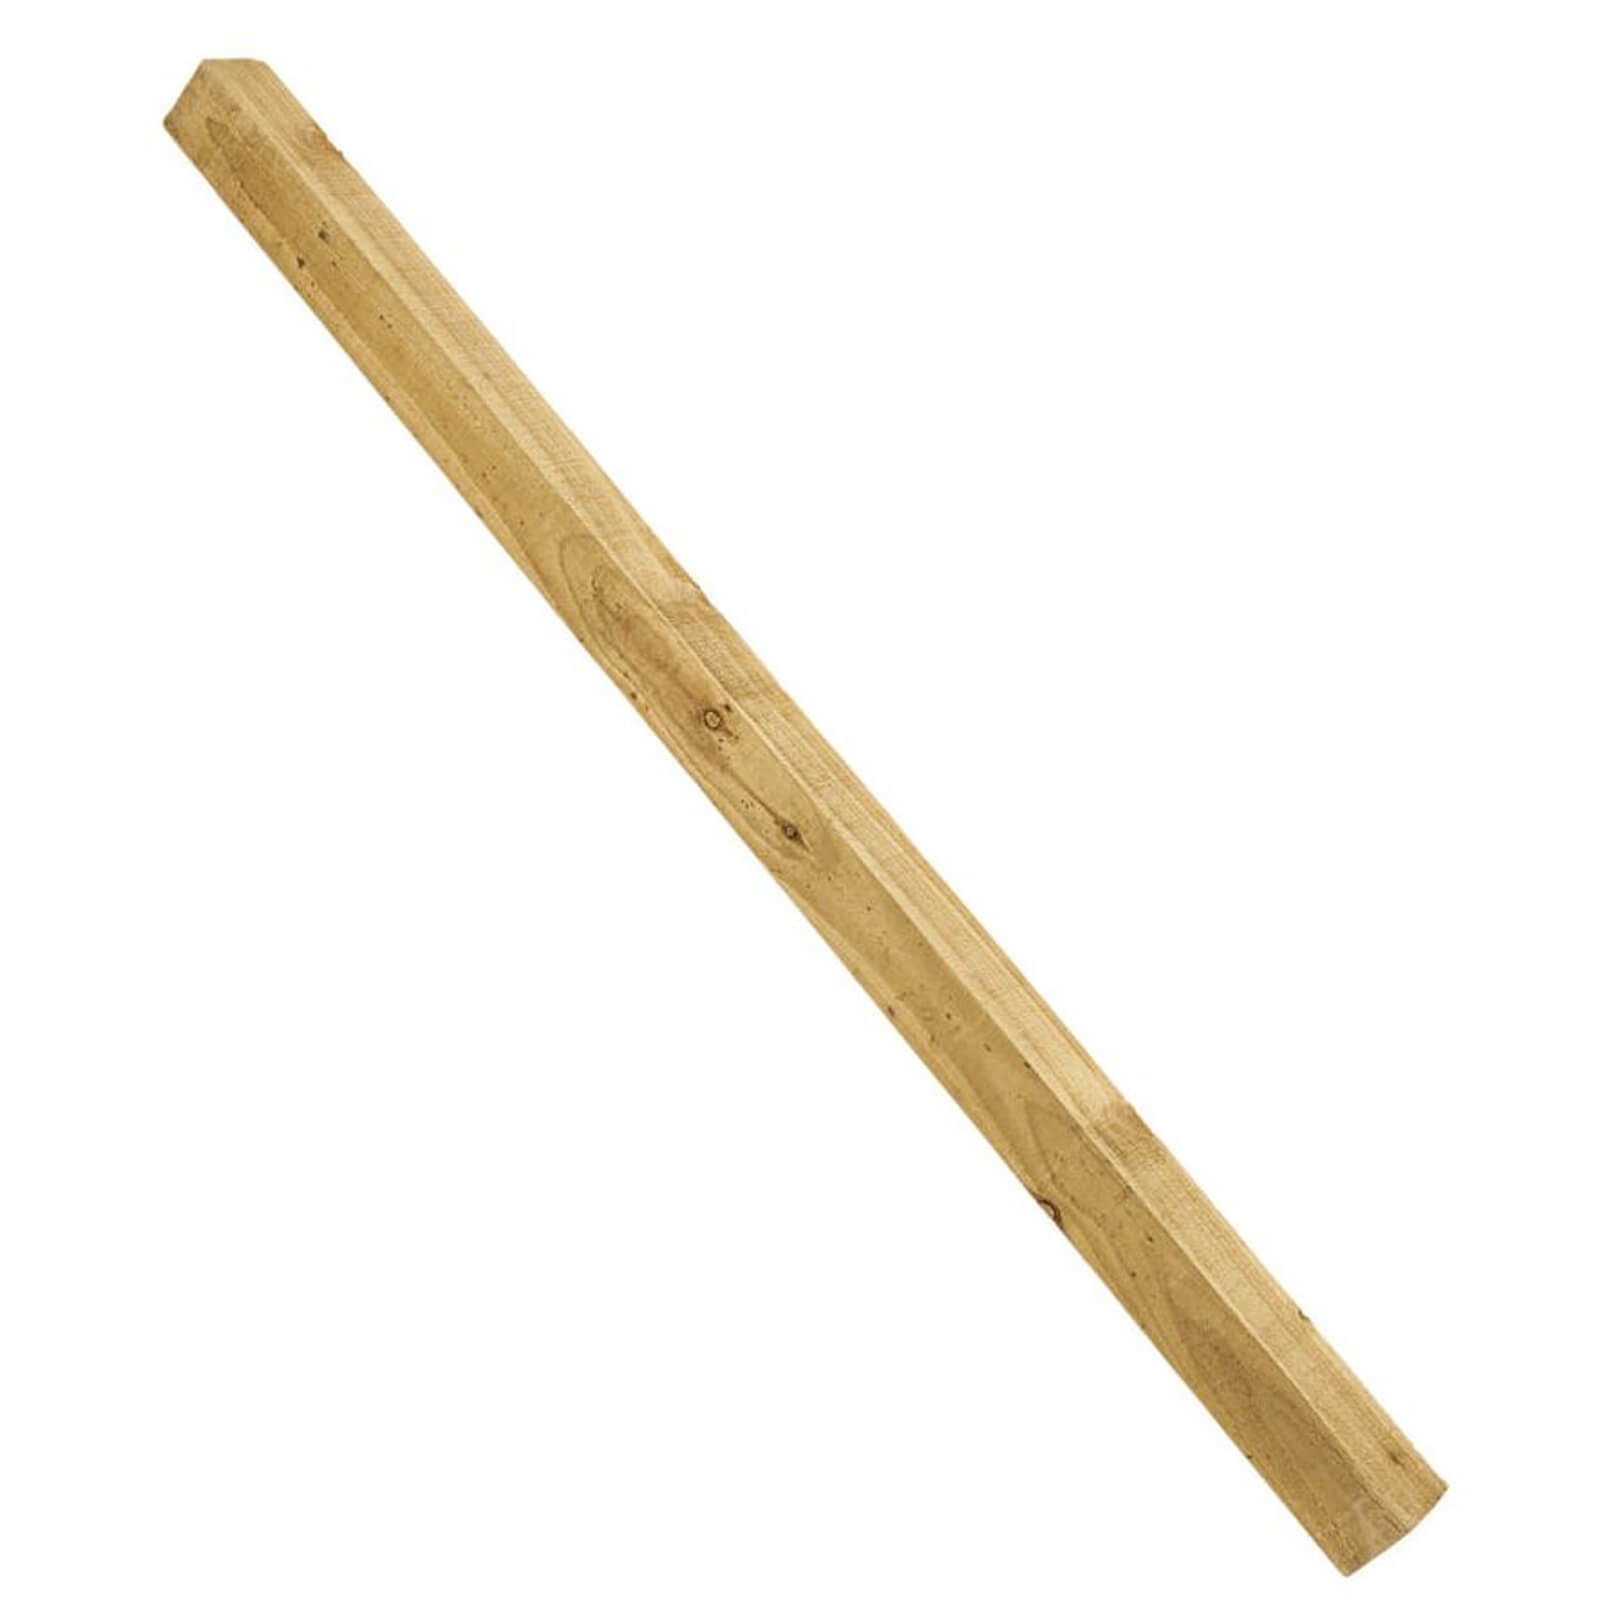 Photo of Larchlap Sawn Post - 6ft X 3in X 3in - 4 Pack